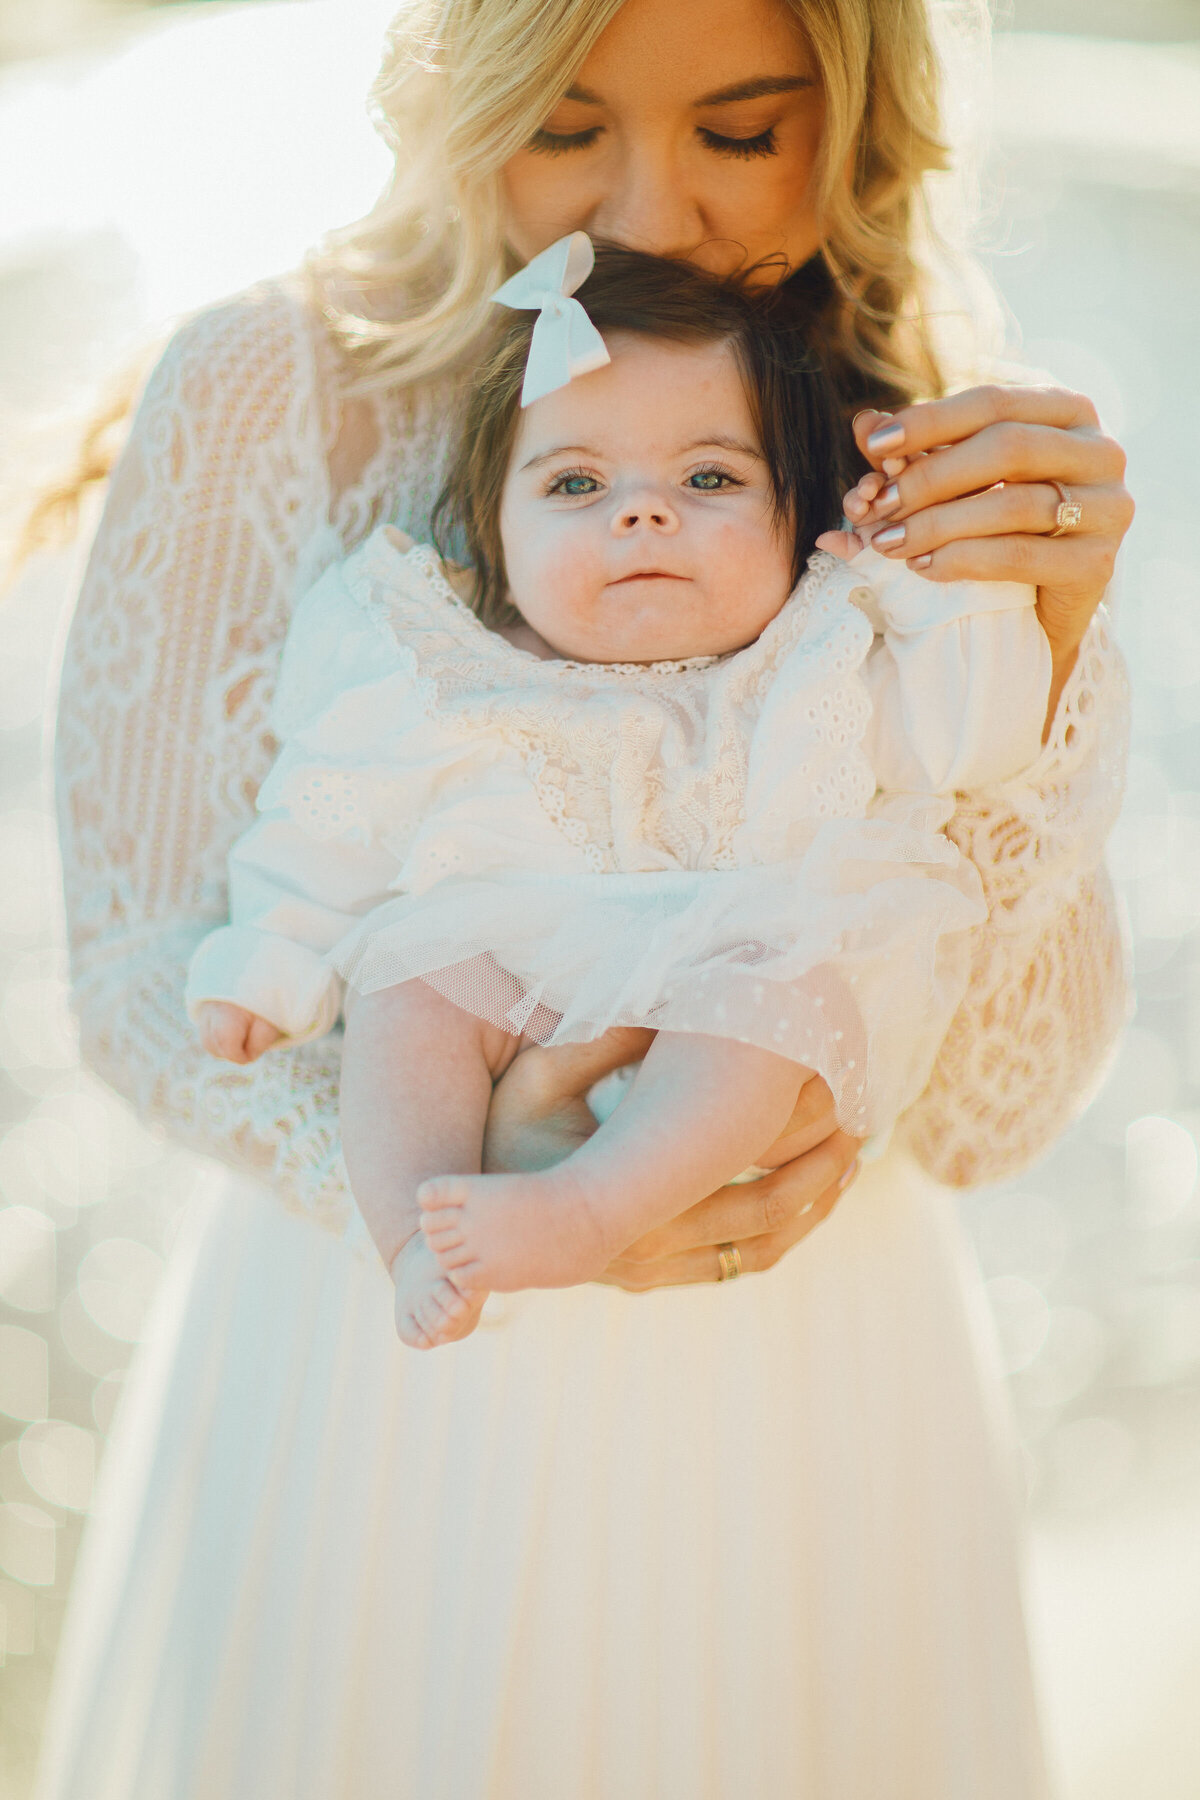 Family Portrait Photo Of Mother And Baby In White Dress Los Angeles